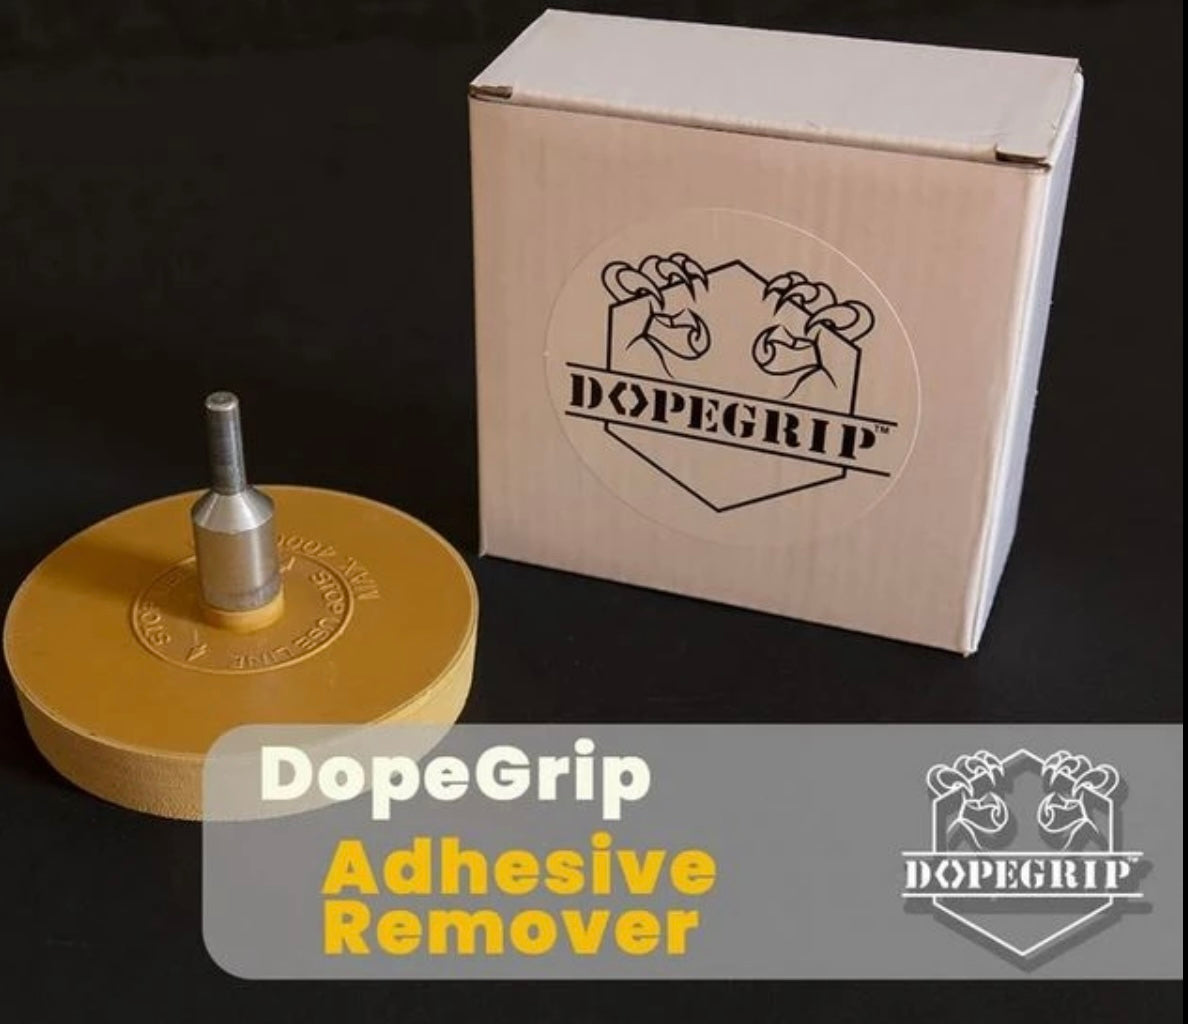 The Dope Grip box and tool